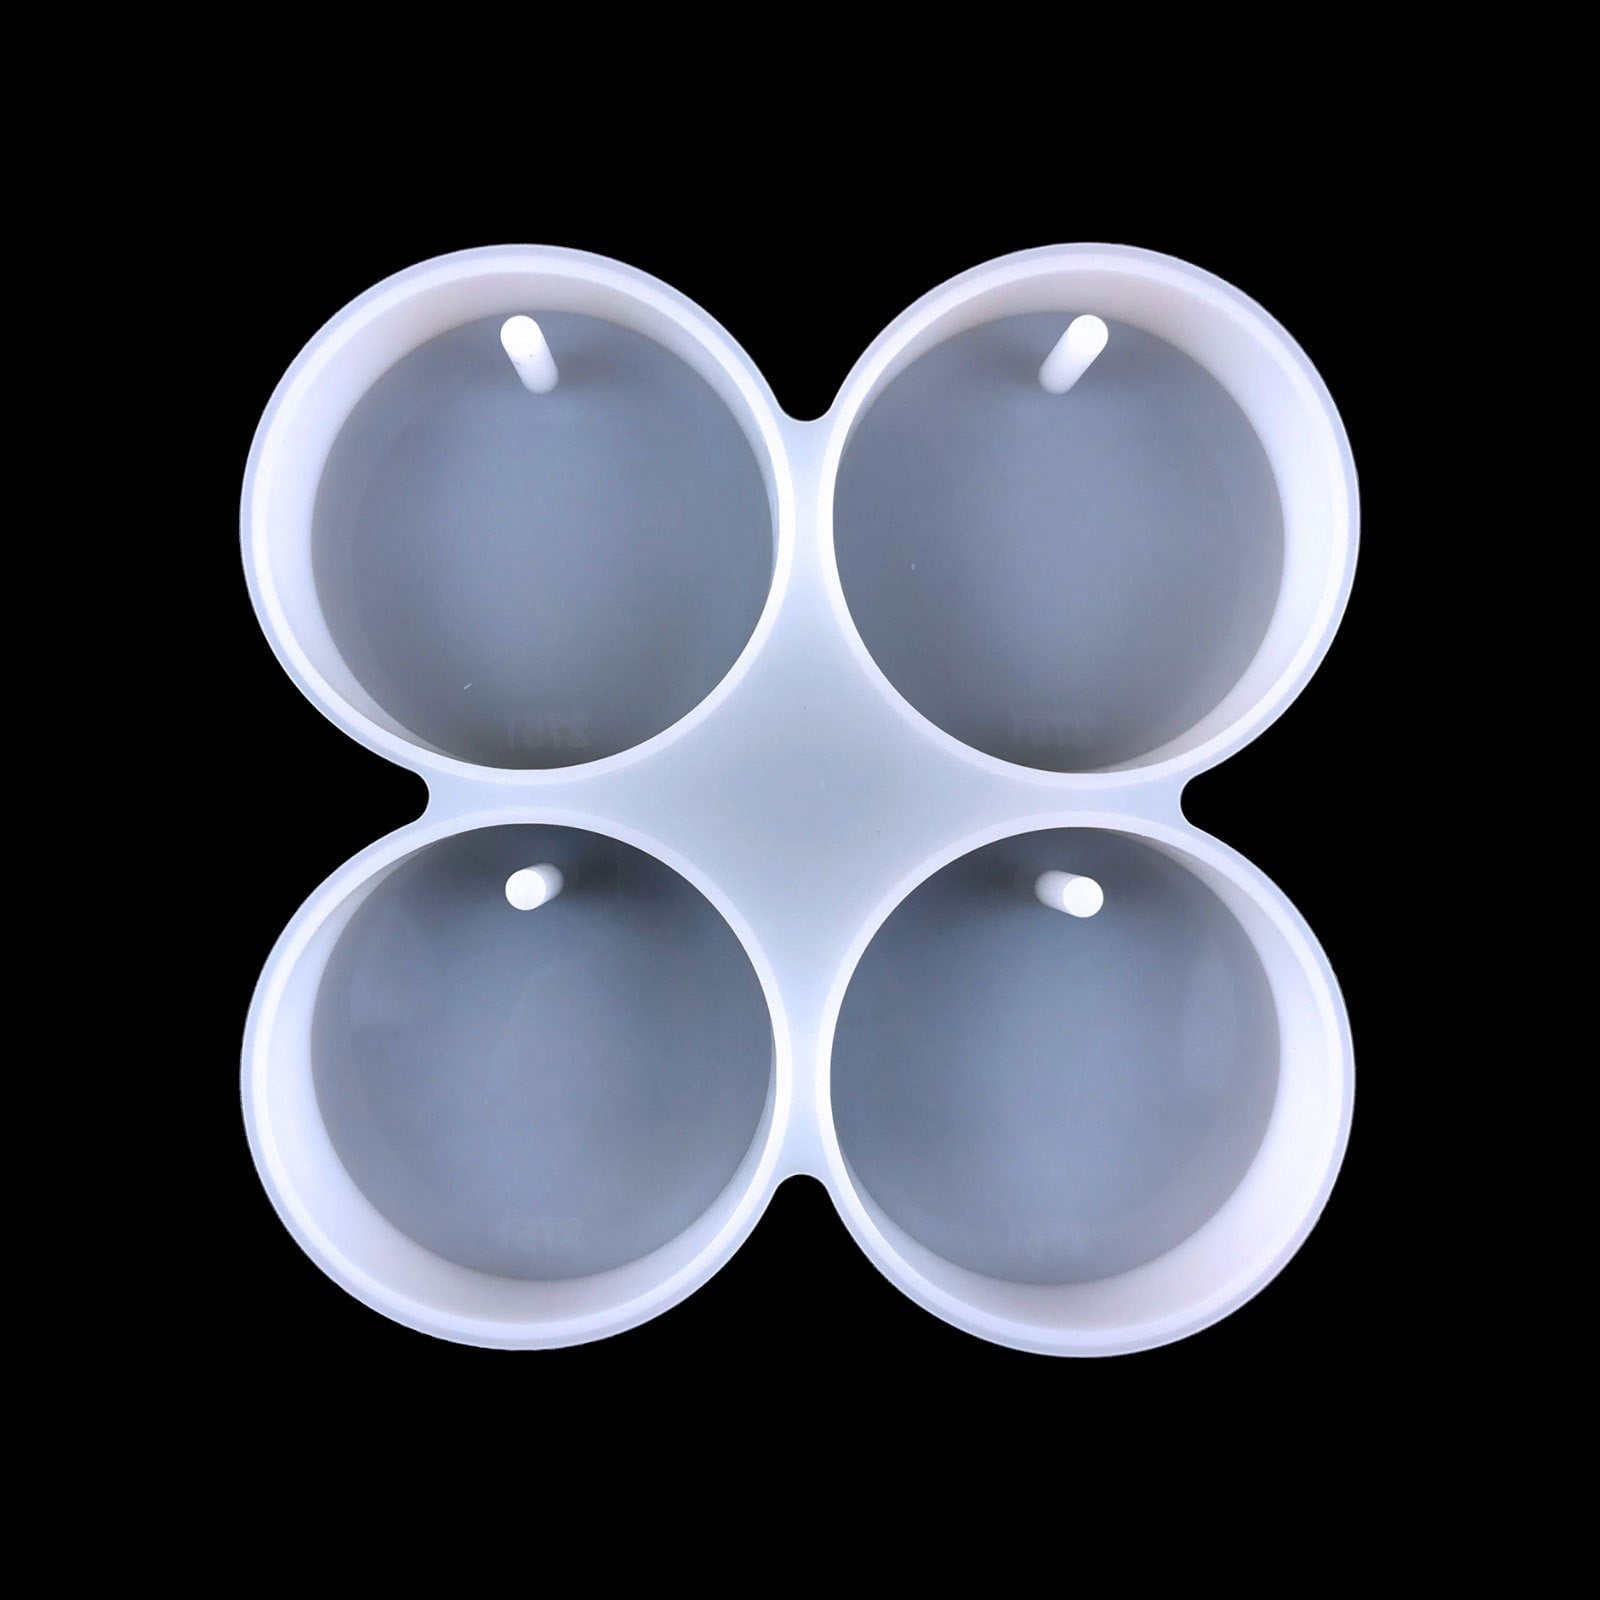 Dengmore Car Molds for Aroma Beads Silicone Molds for Soap Wax Melts Clay  Candles Epoxy Resin Molds Car Aromatherapy Supplies 